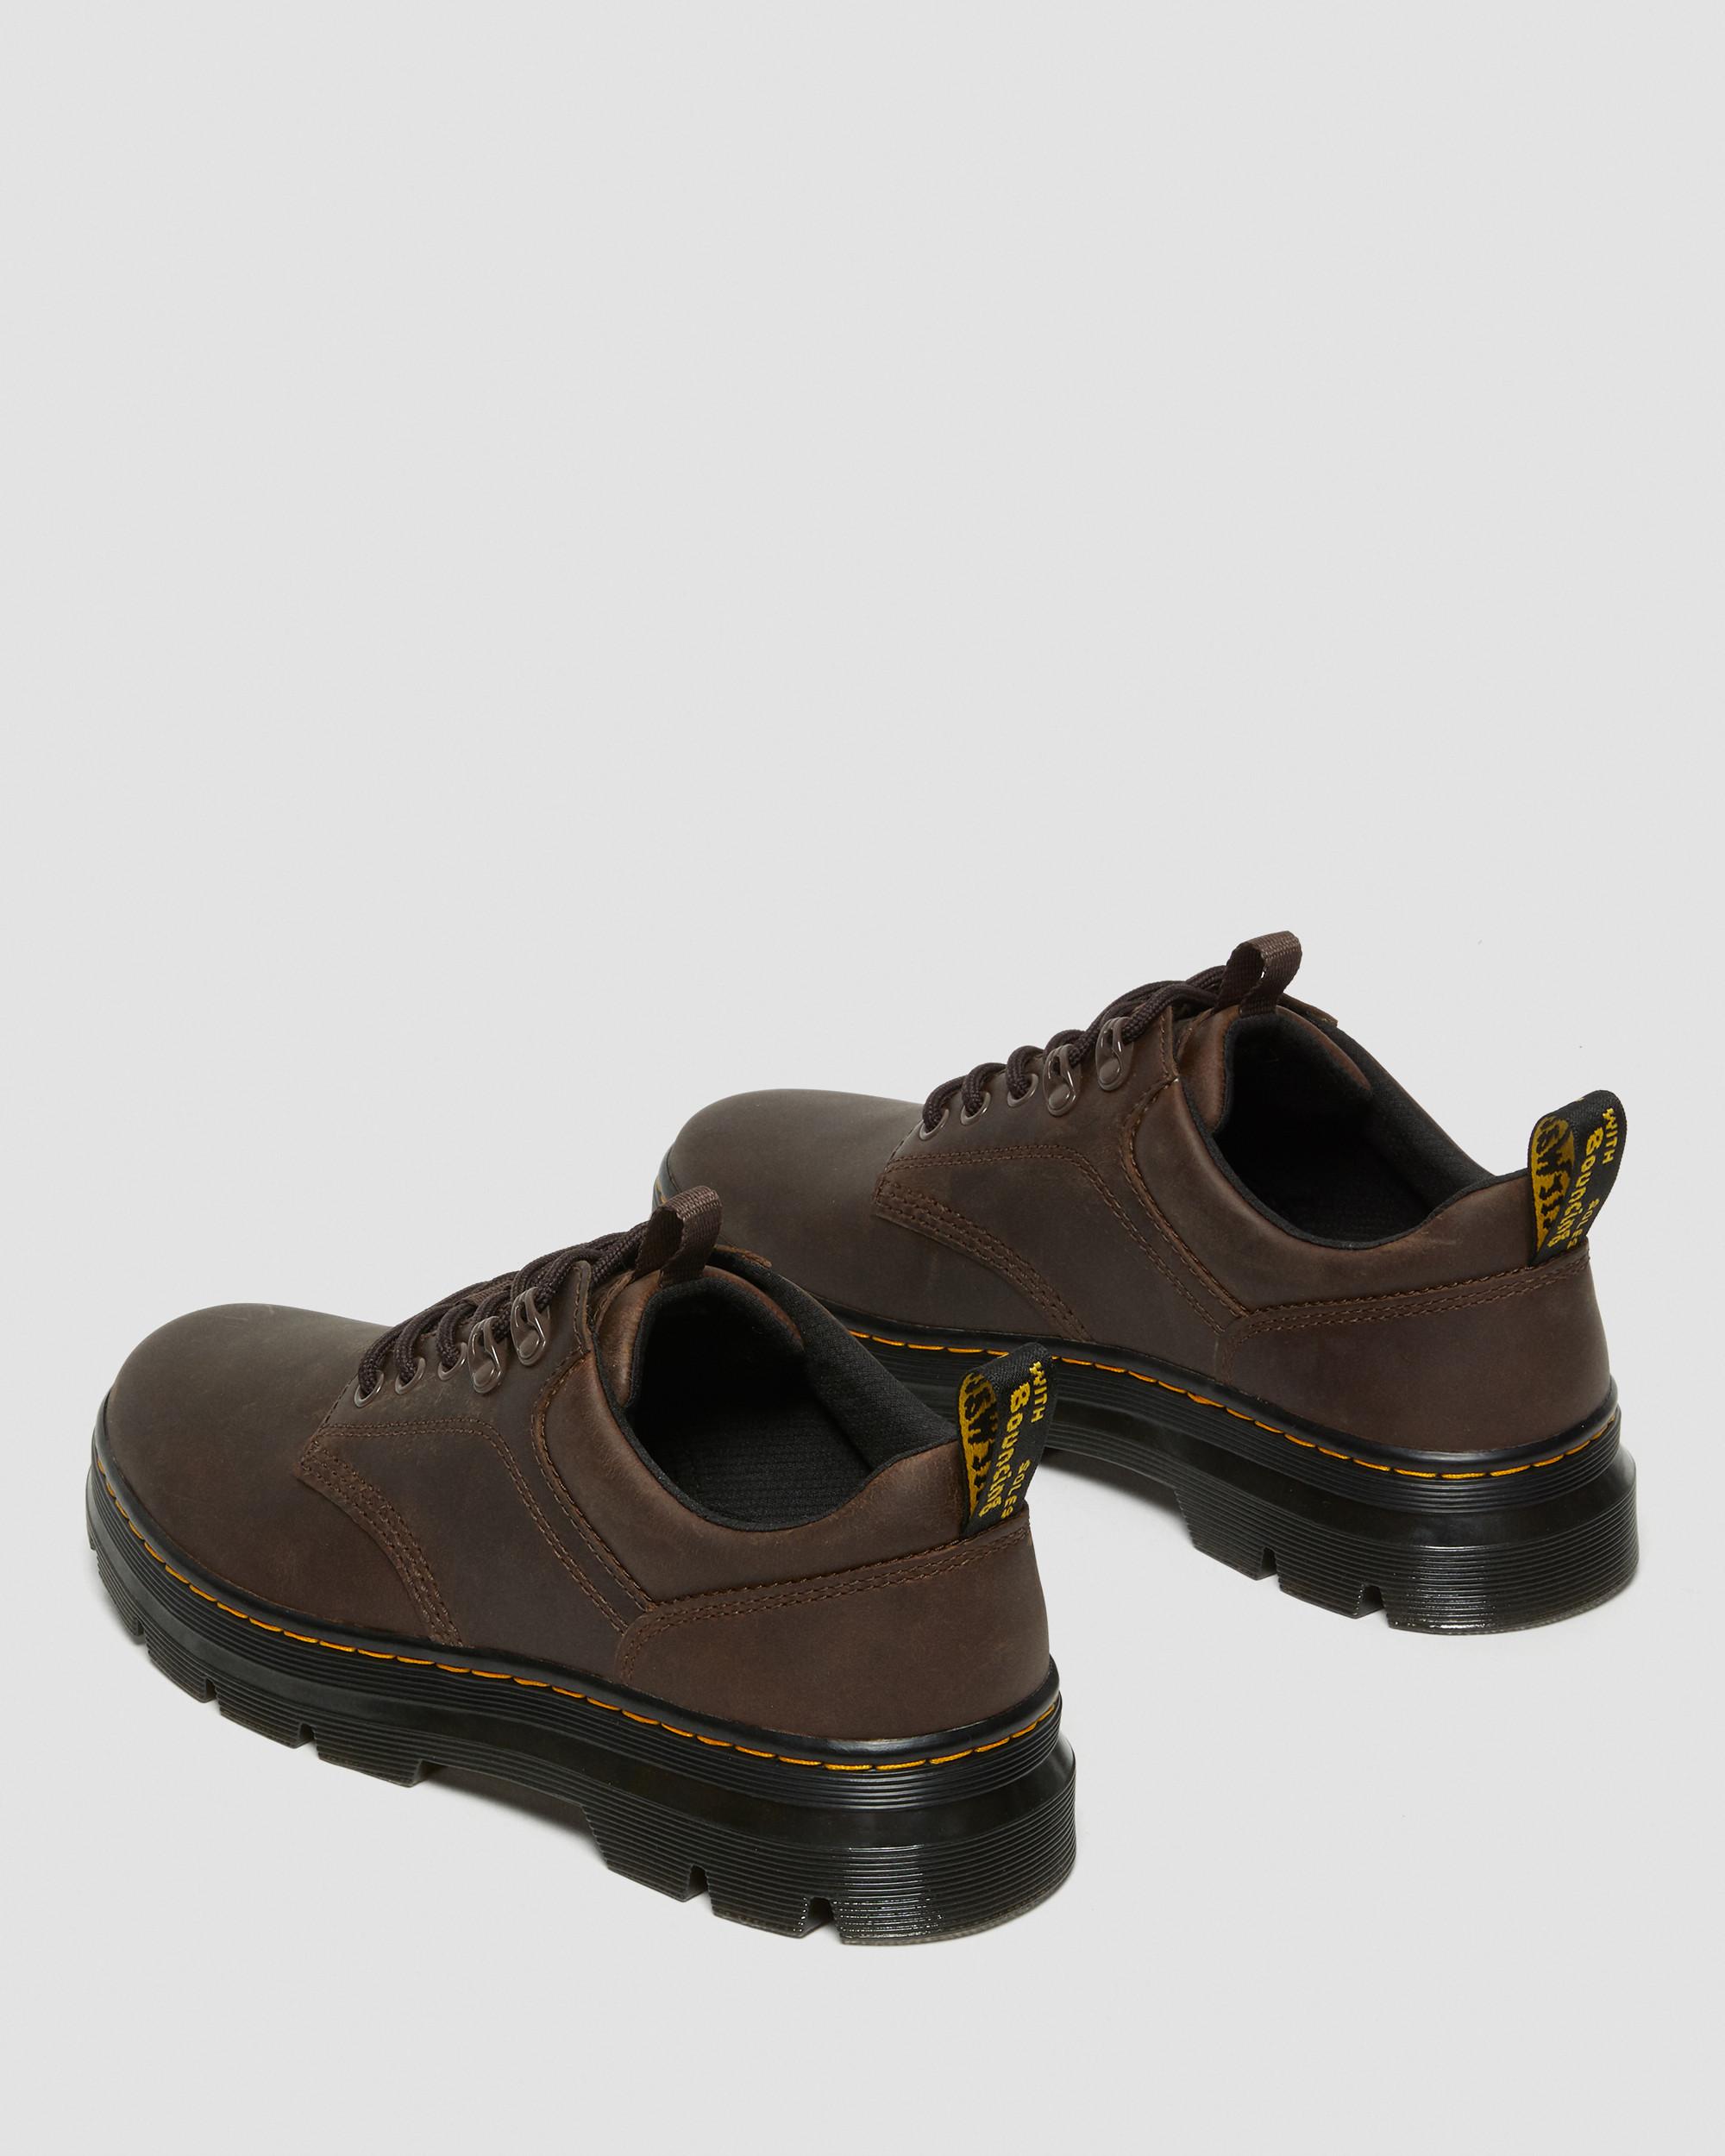 Reeder Crazy Horse Leather Utility Shoes in Dark Brown